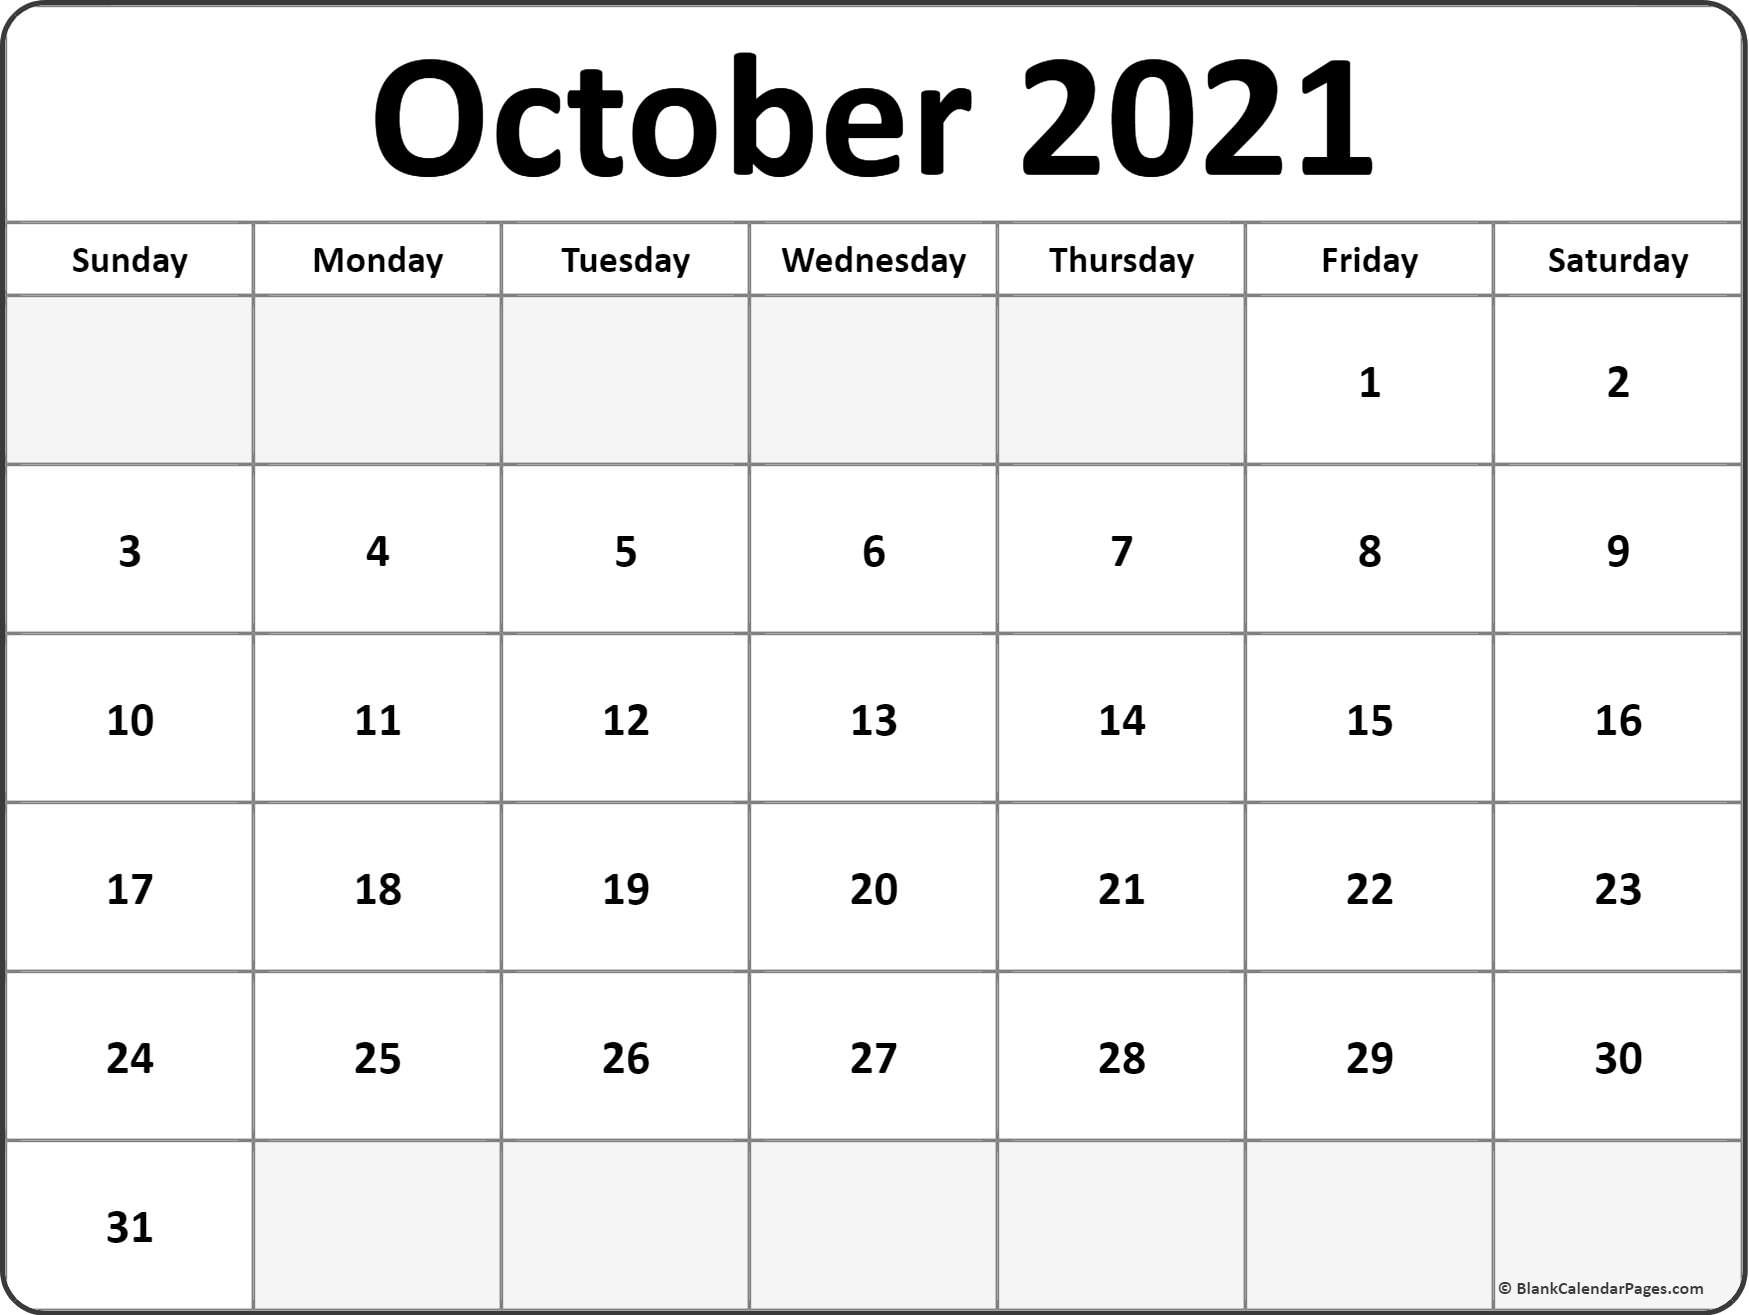 October 2021 Blank Calendar Templates.-Free Monthly 5 Day Schedules For 2021